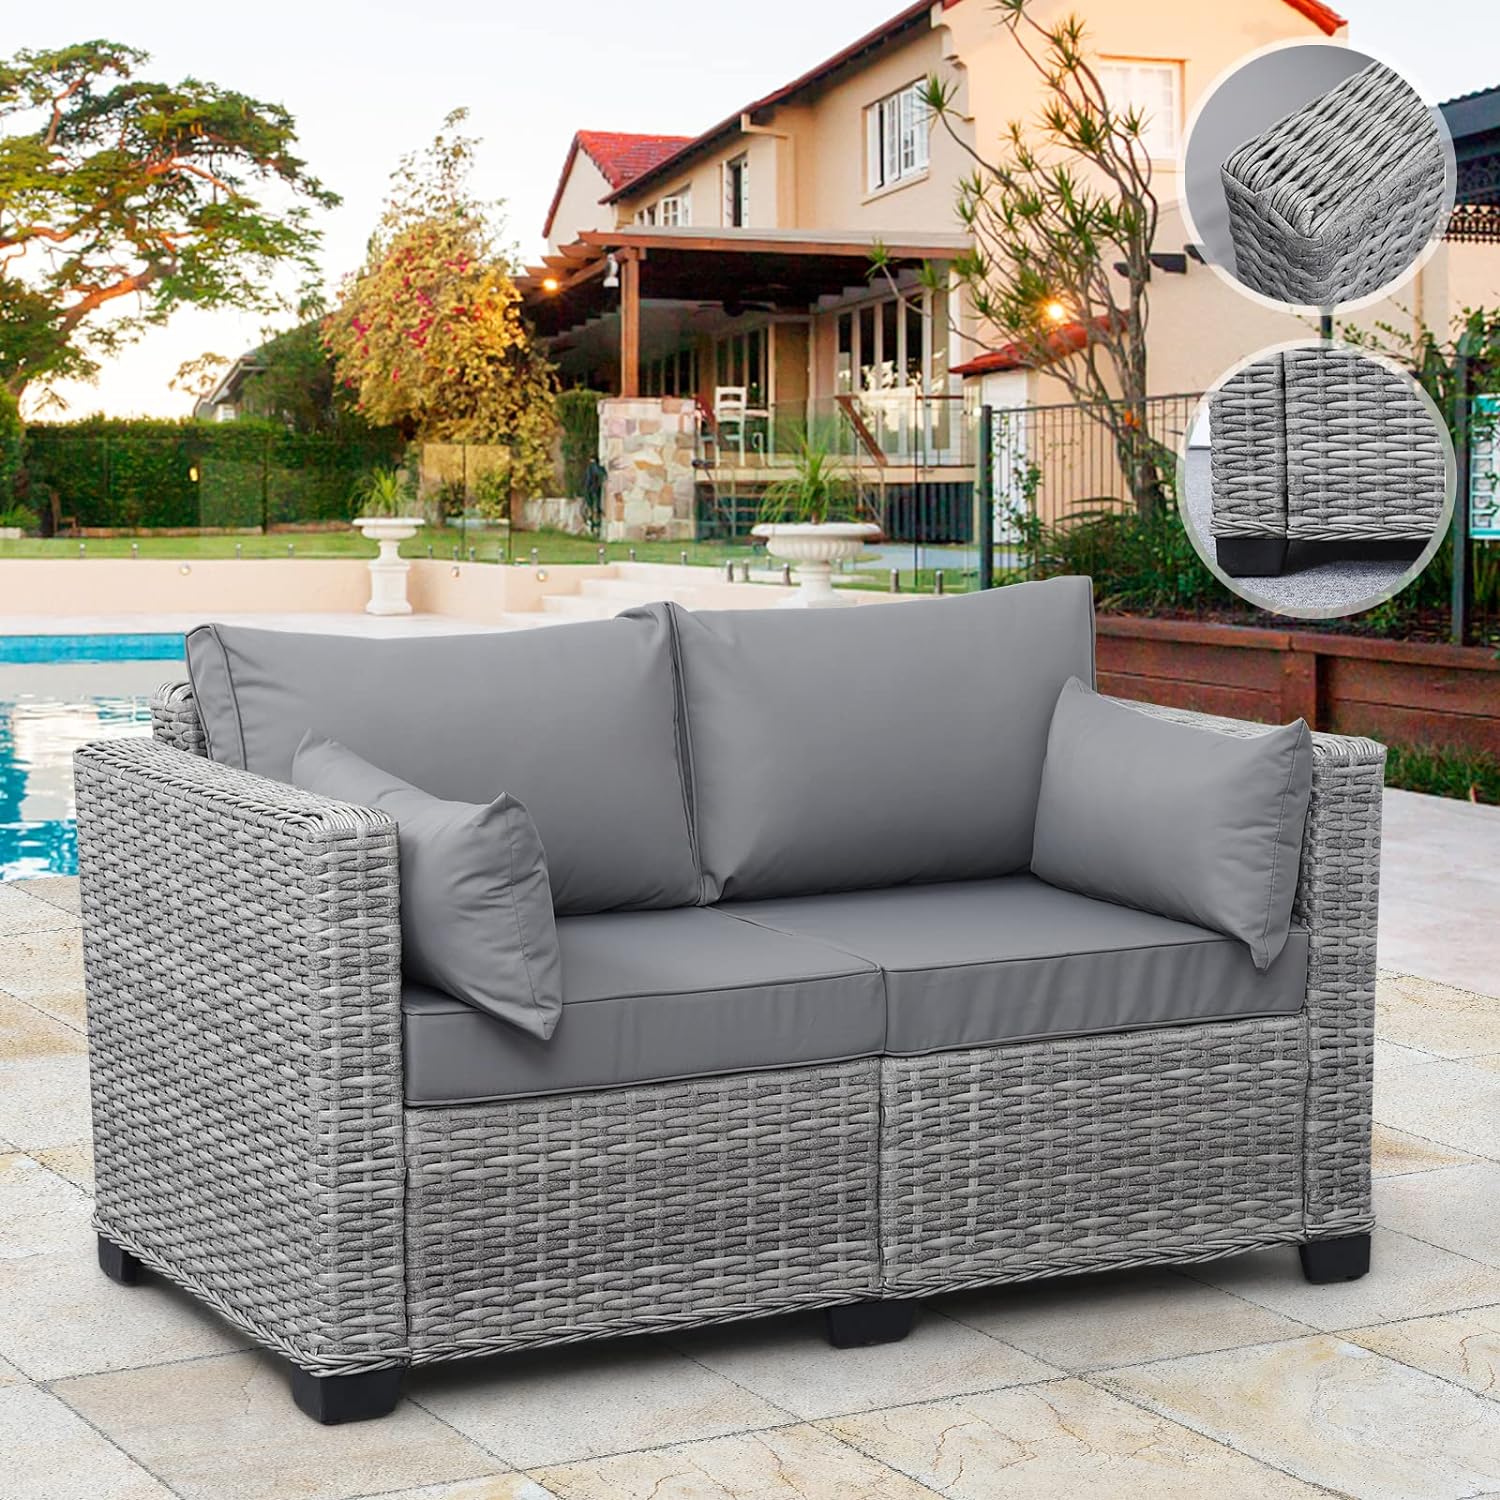 Rattaner Outdoor Furniture Loveseat Sofa Balcony Furniture Outdoor Loveseat 2 Seater Couch Small Sofa with Anti-Slip Outdoor Cushion Lumbar Pillow and Furniture Cover, Grey